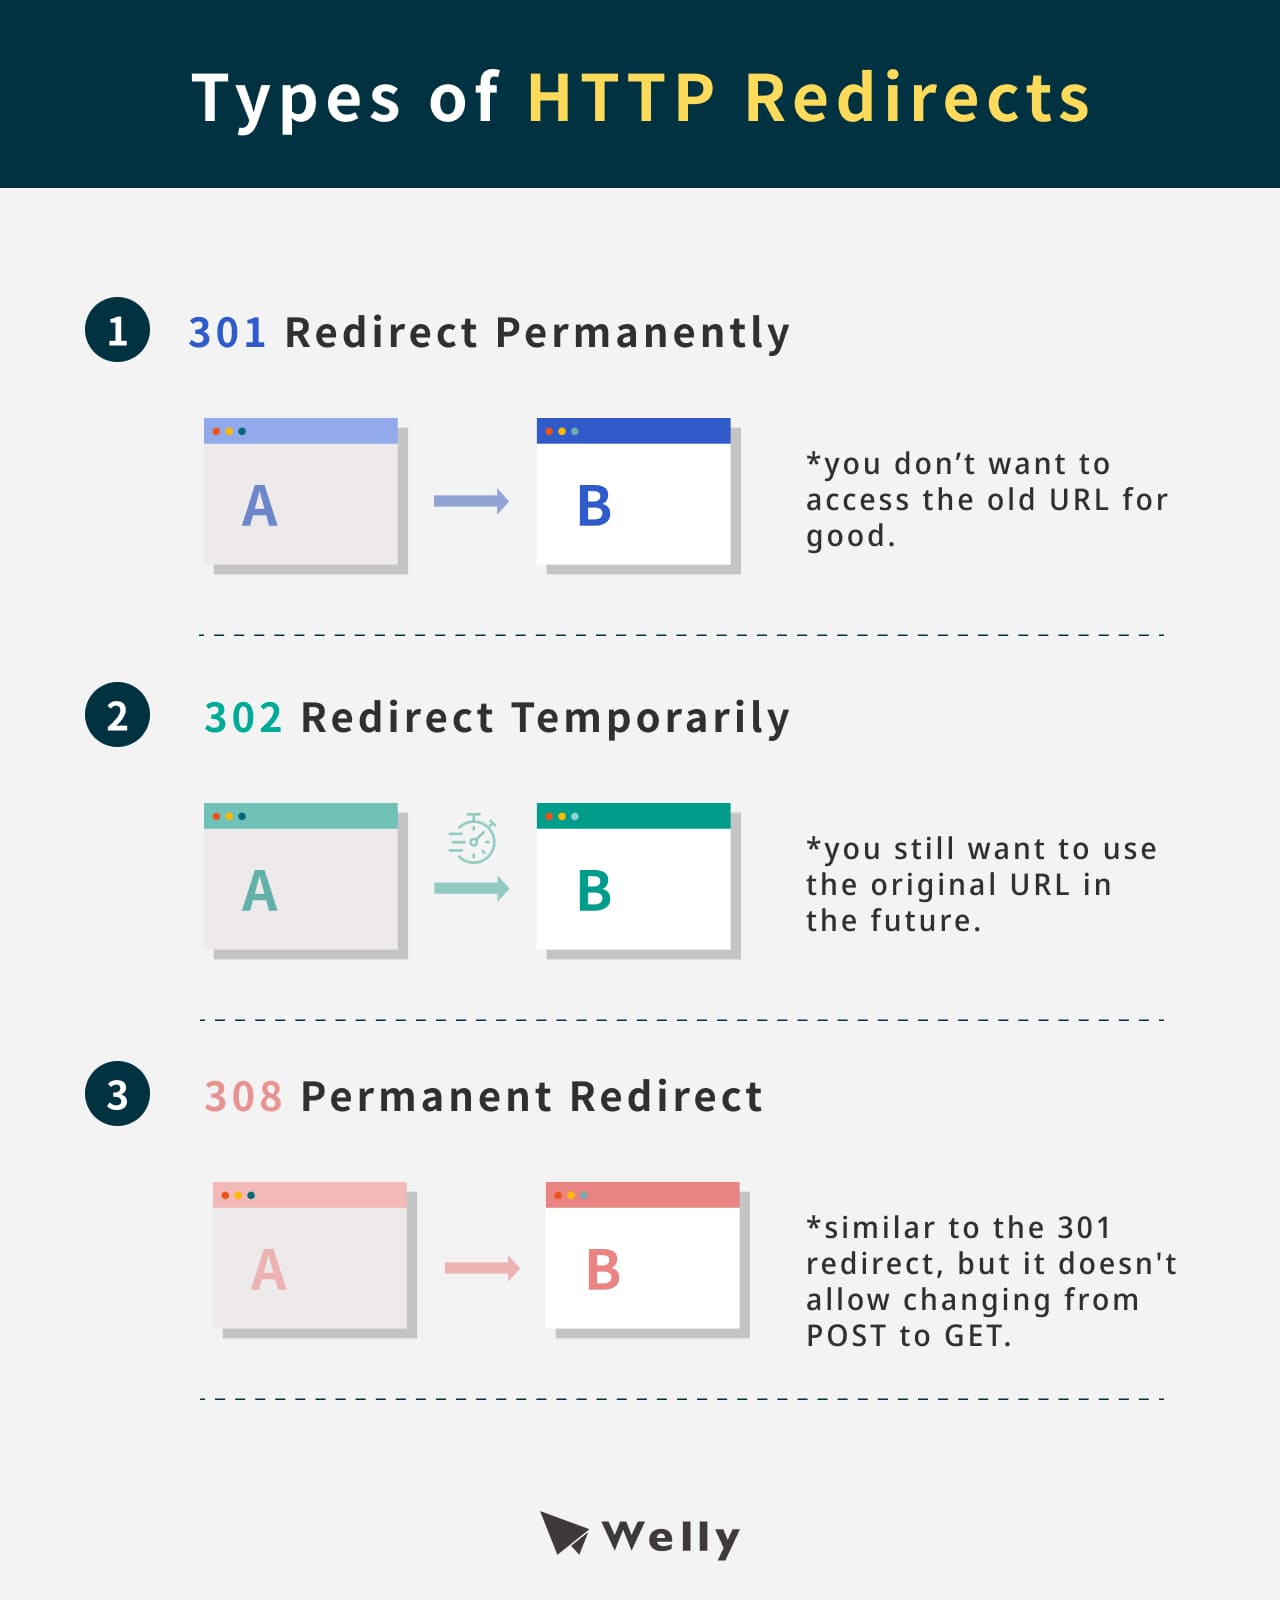 Types of HTTP Redirects